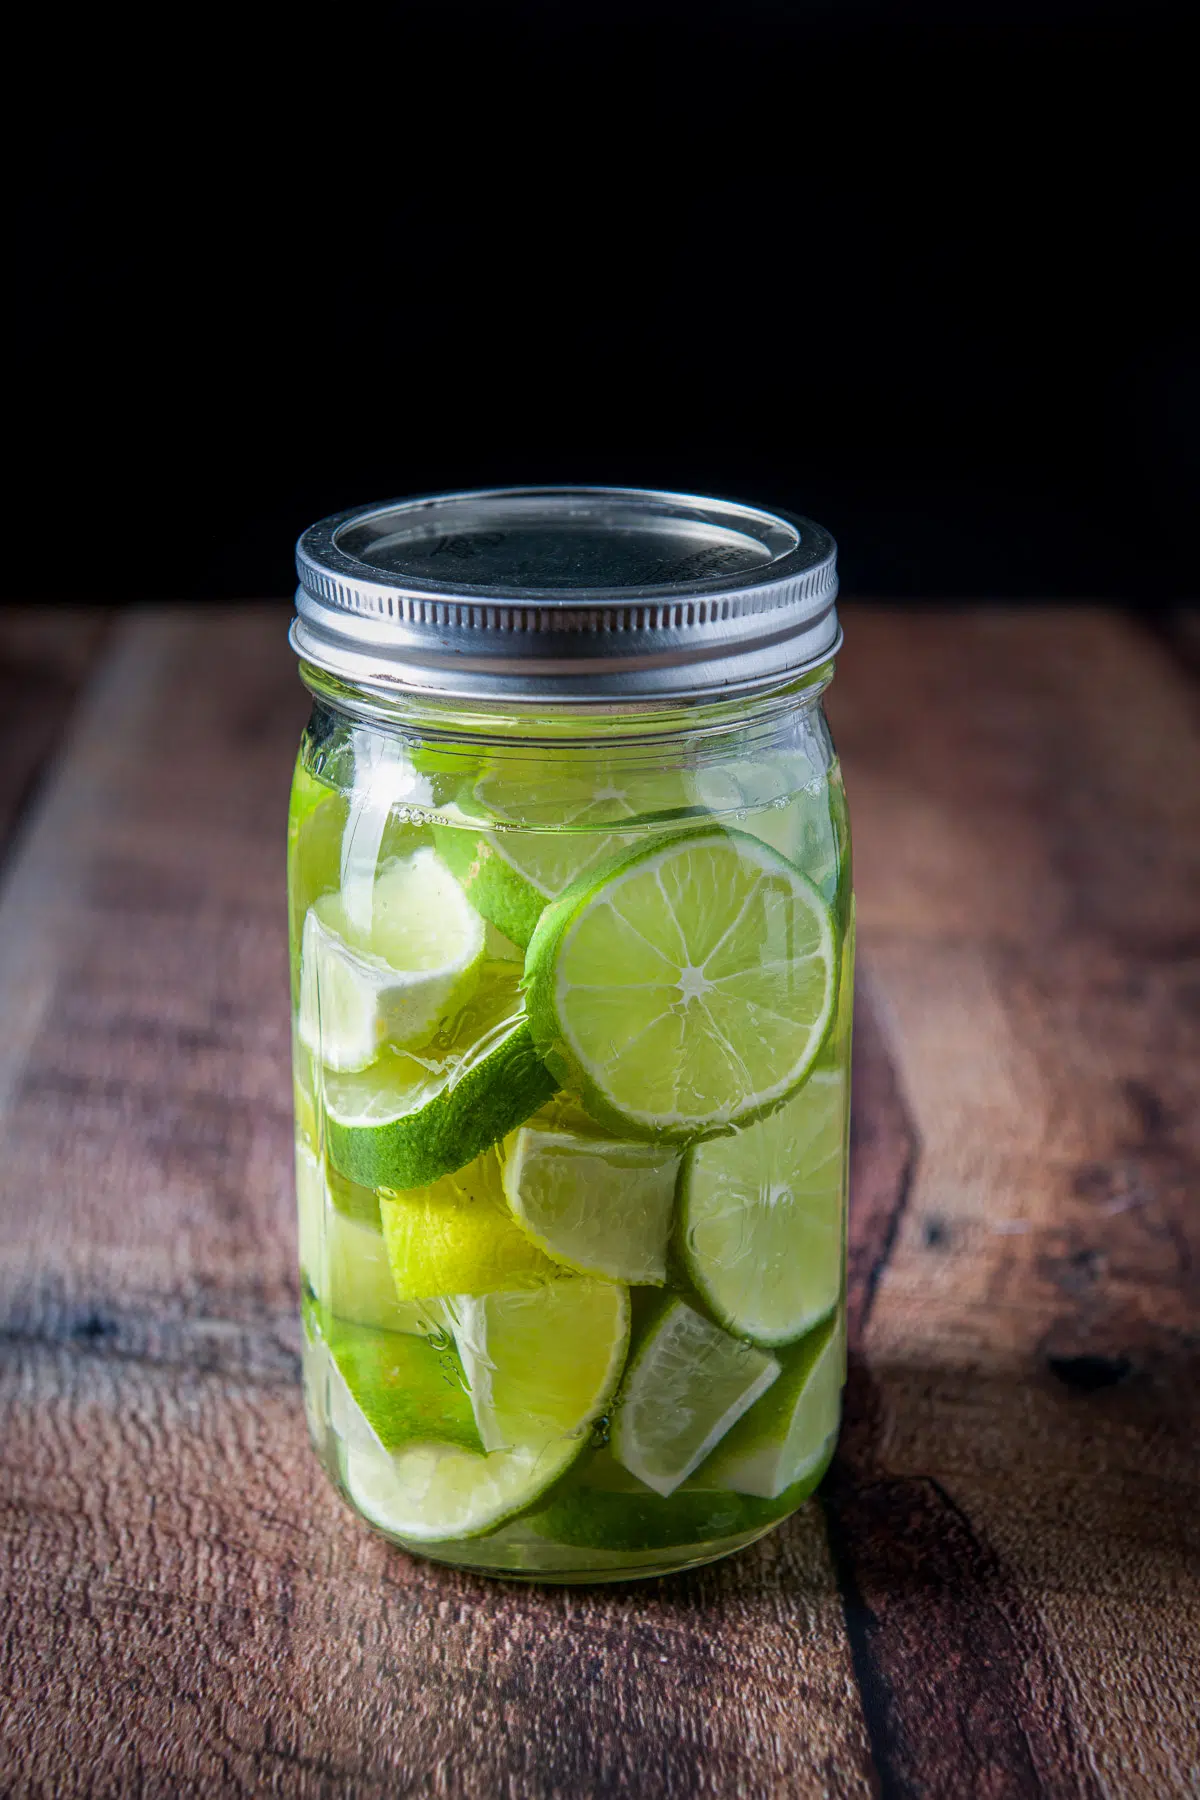 The lid capped on the jar of limes and vodka